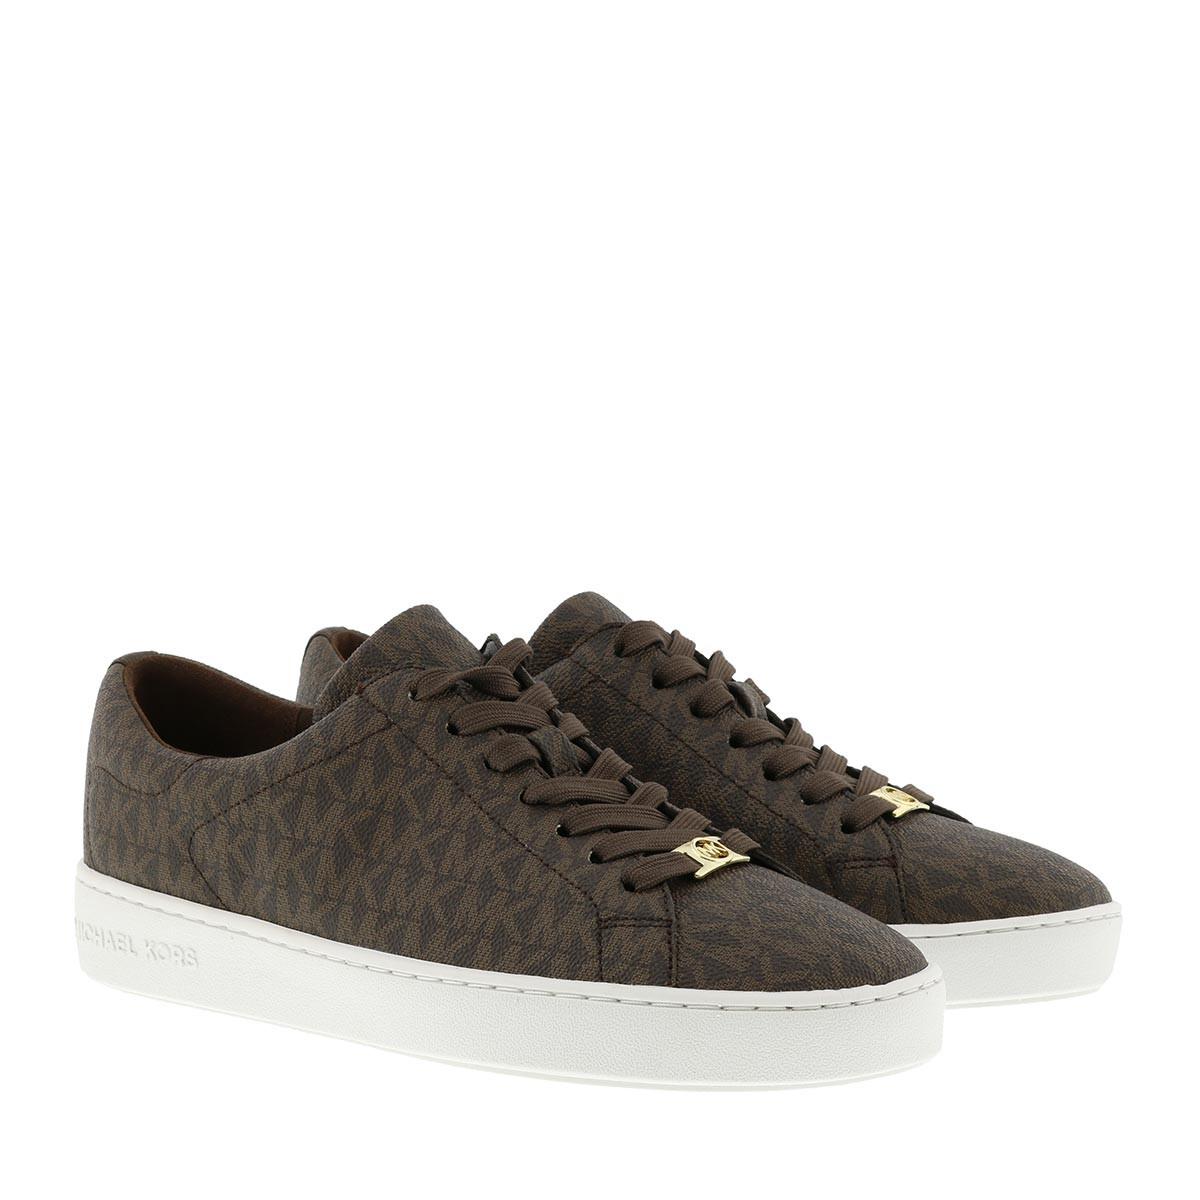 Michael Kors Synthetic Keaton Lace Up Sneaker Brown - Save 5% - Lyst